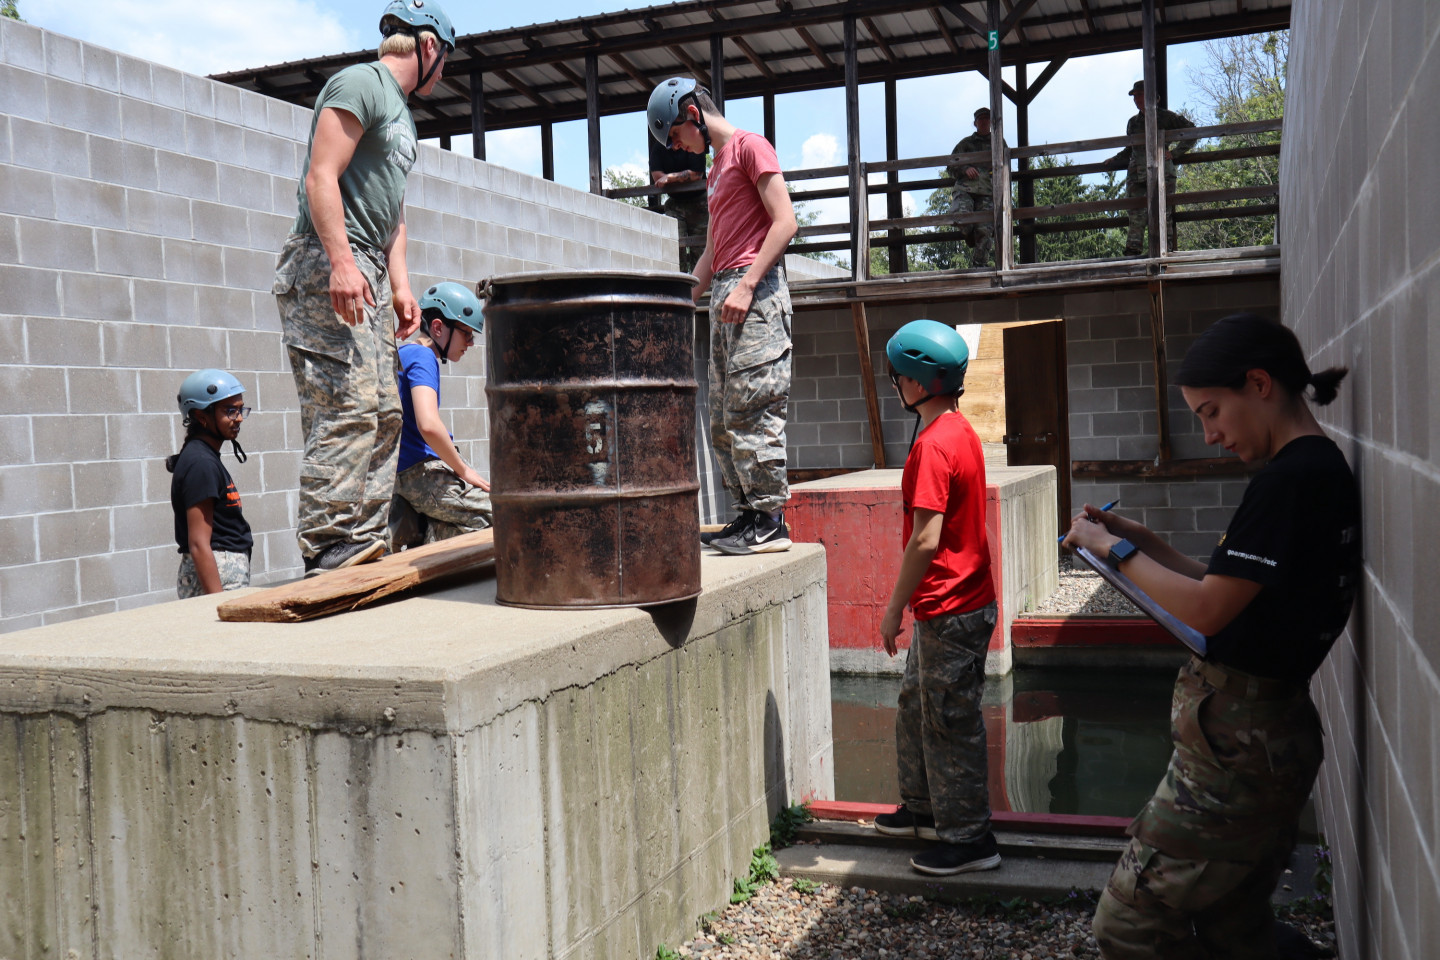 ROTC cadet Carolina Castanheira leans against a cement while campers stand on a cement slab with equipment for an obstacle.